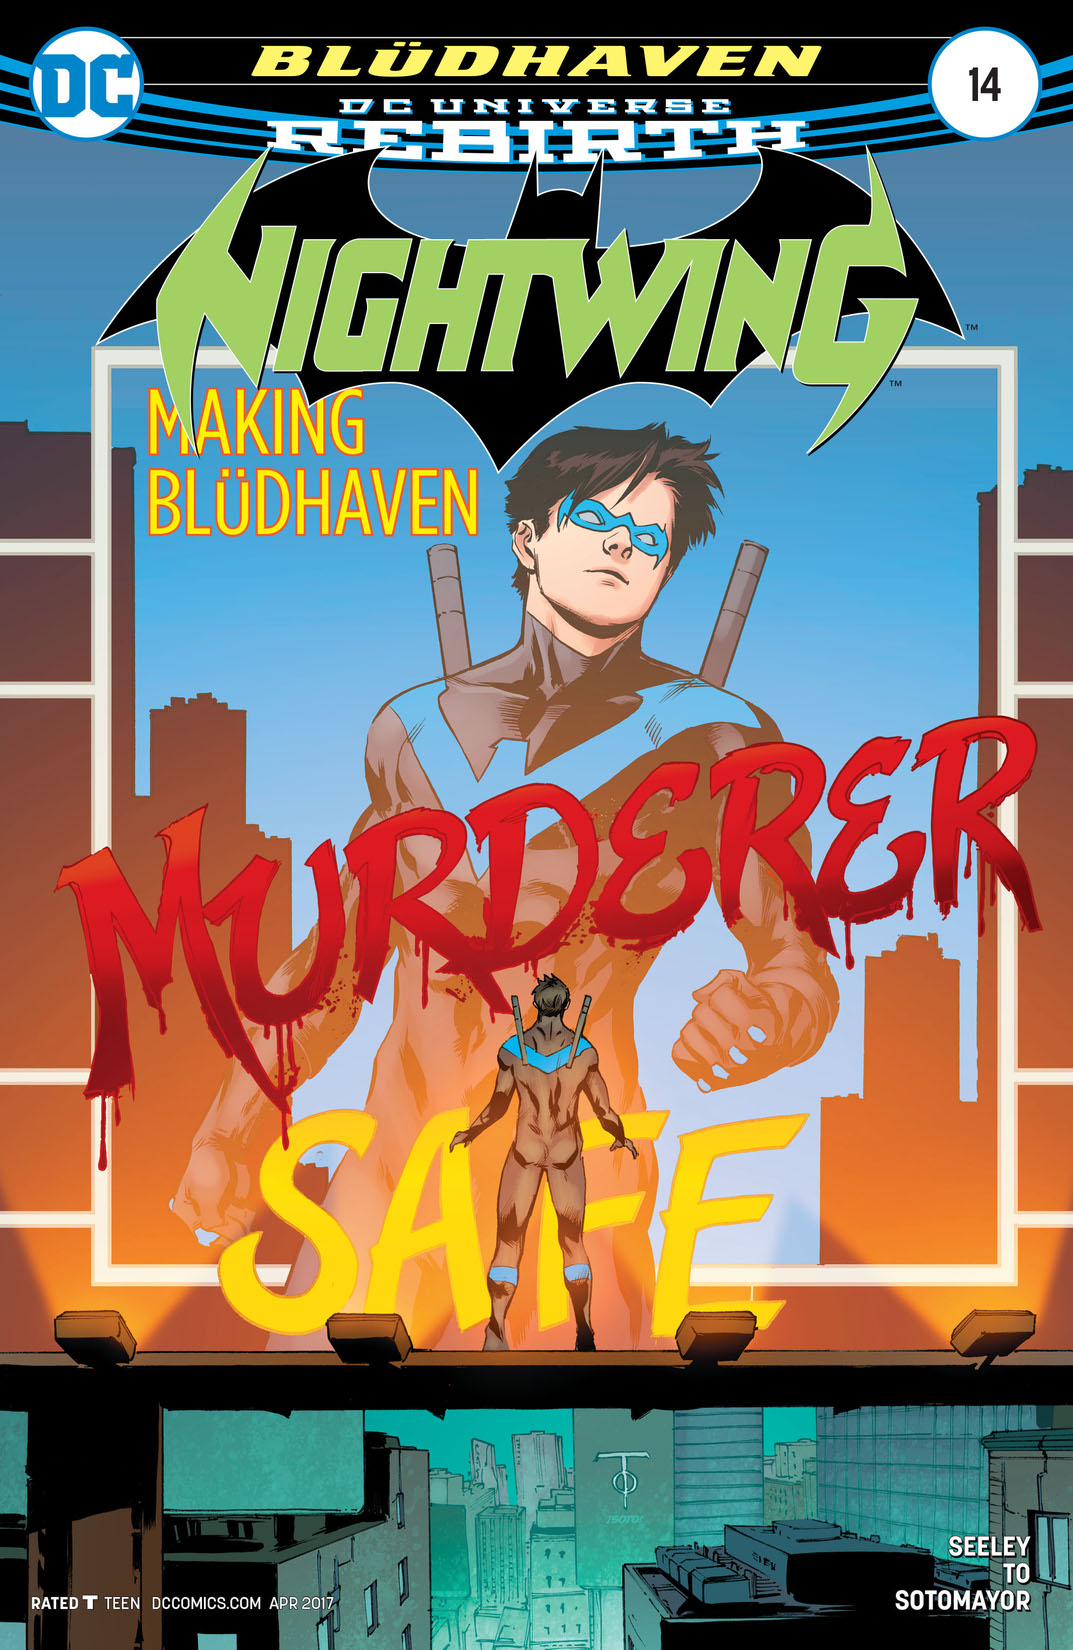 Nightwing (2016-) #14 preview images